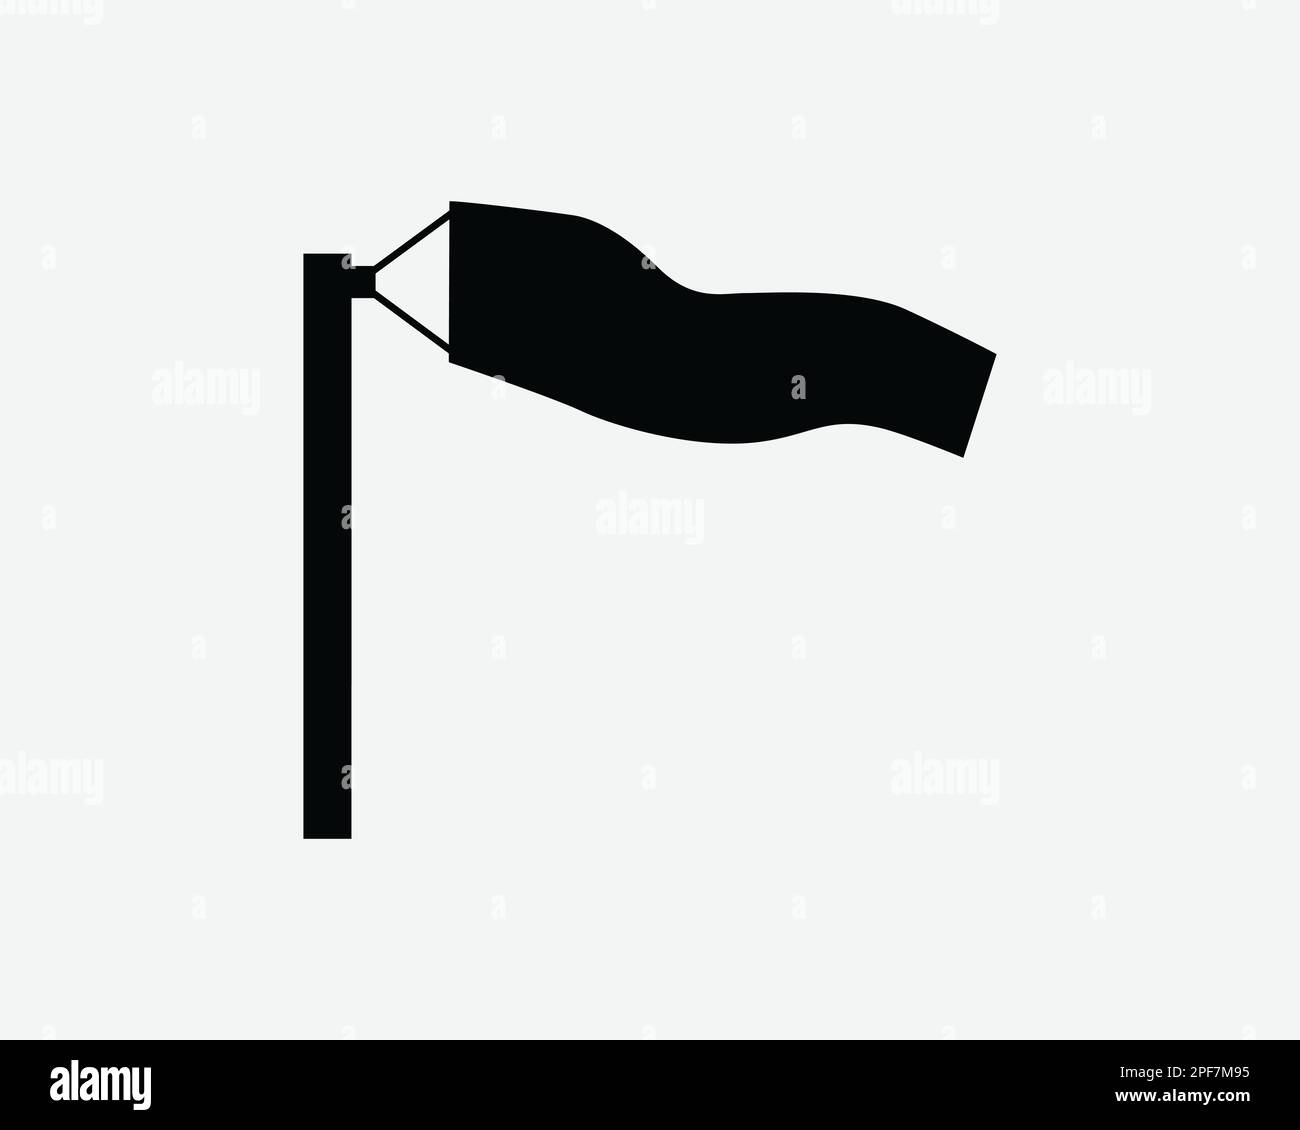 Windsock Icon Wind Cone Sleeve Tube Speed Direction Weather Vector Black White Silhouette Symbol Sign Graphic Clipart Artwork Illustration Pictogram Stock Vector